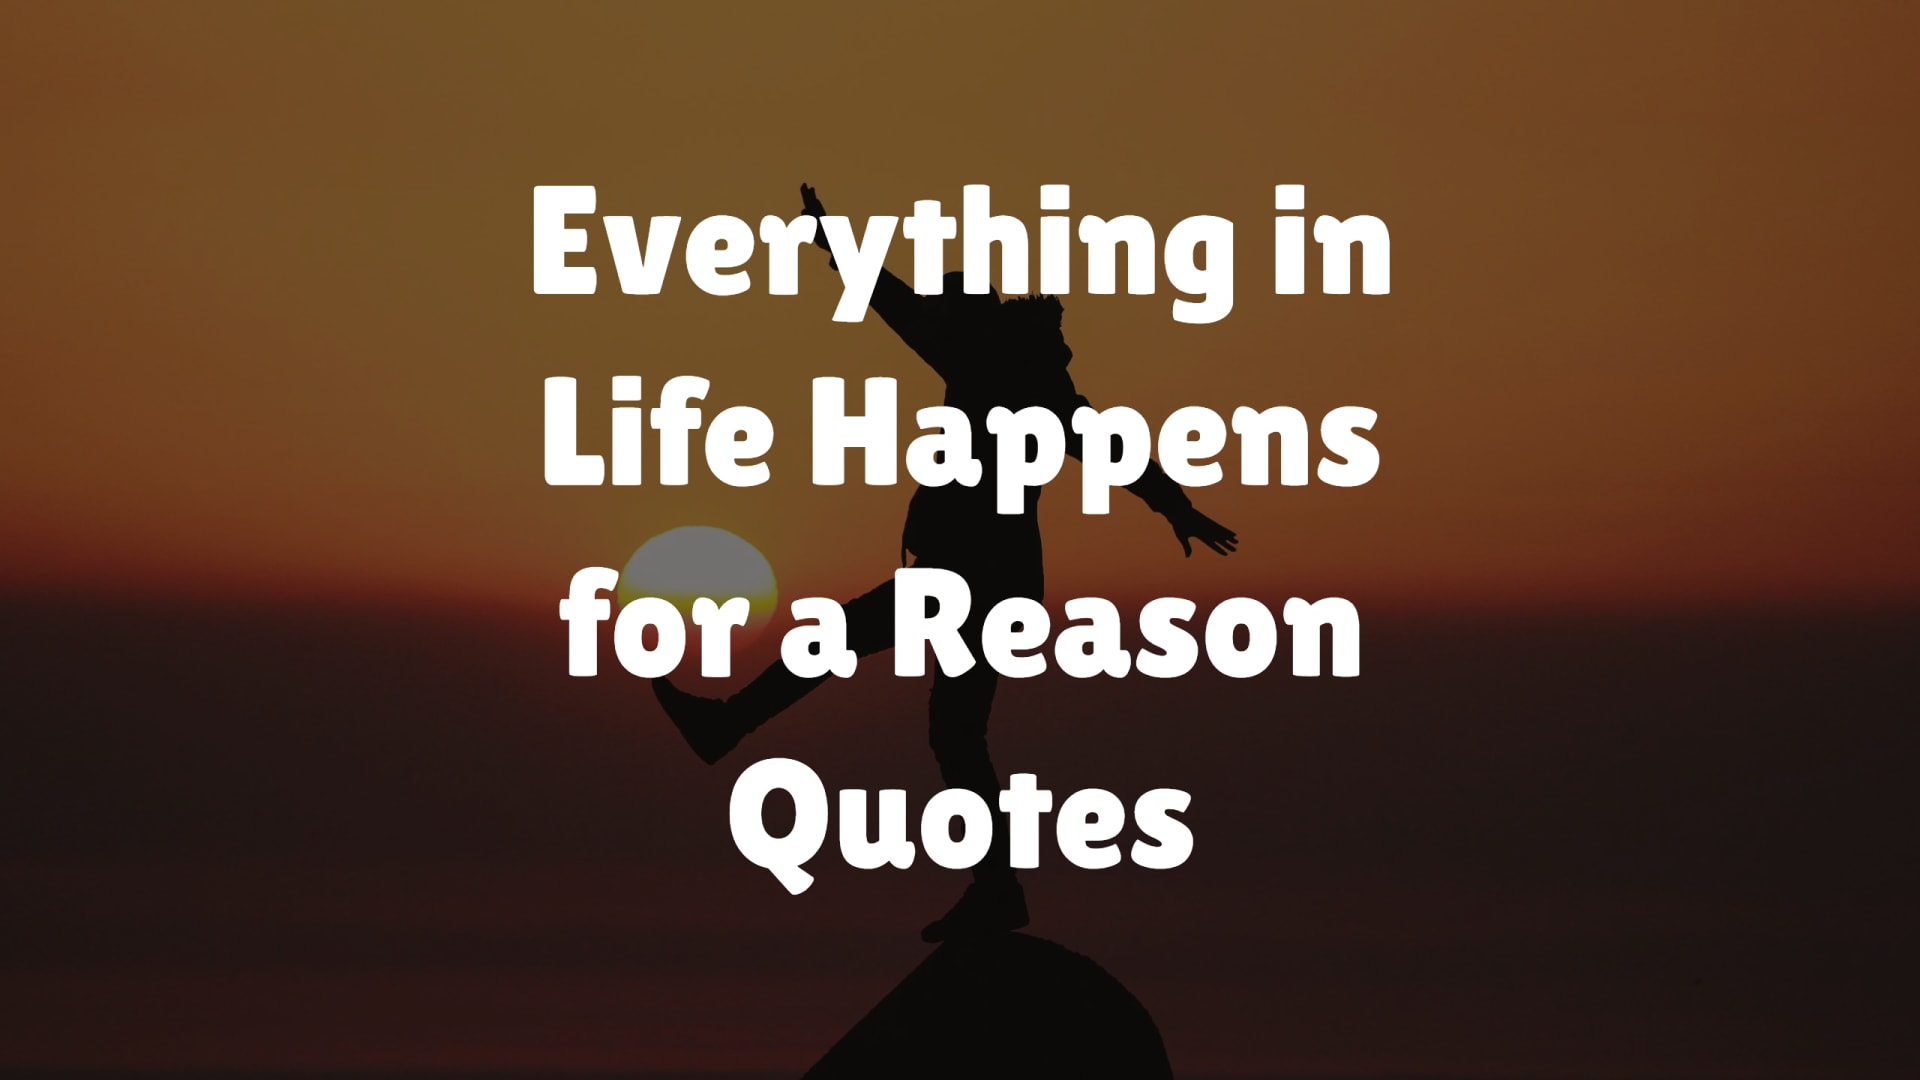 Everything in Life Happens for a Reason Quotes